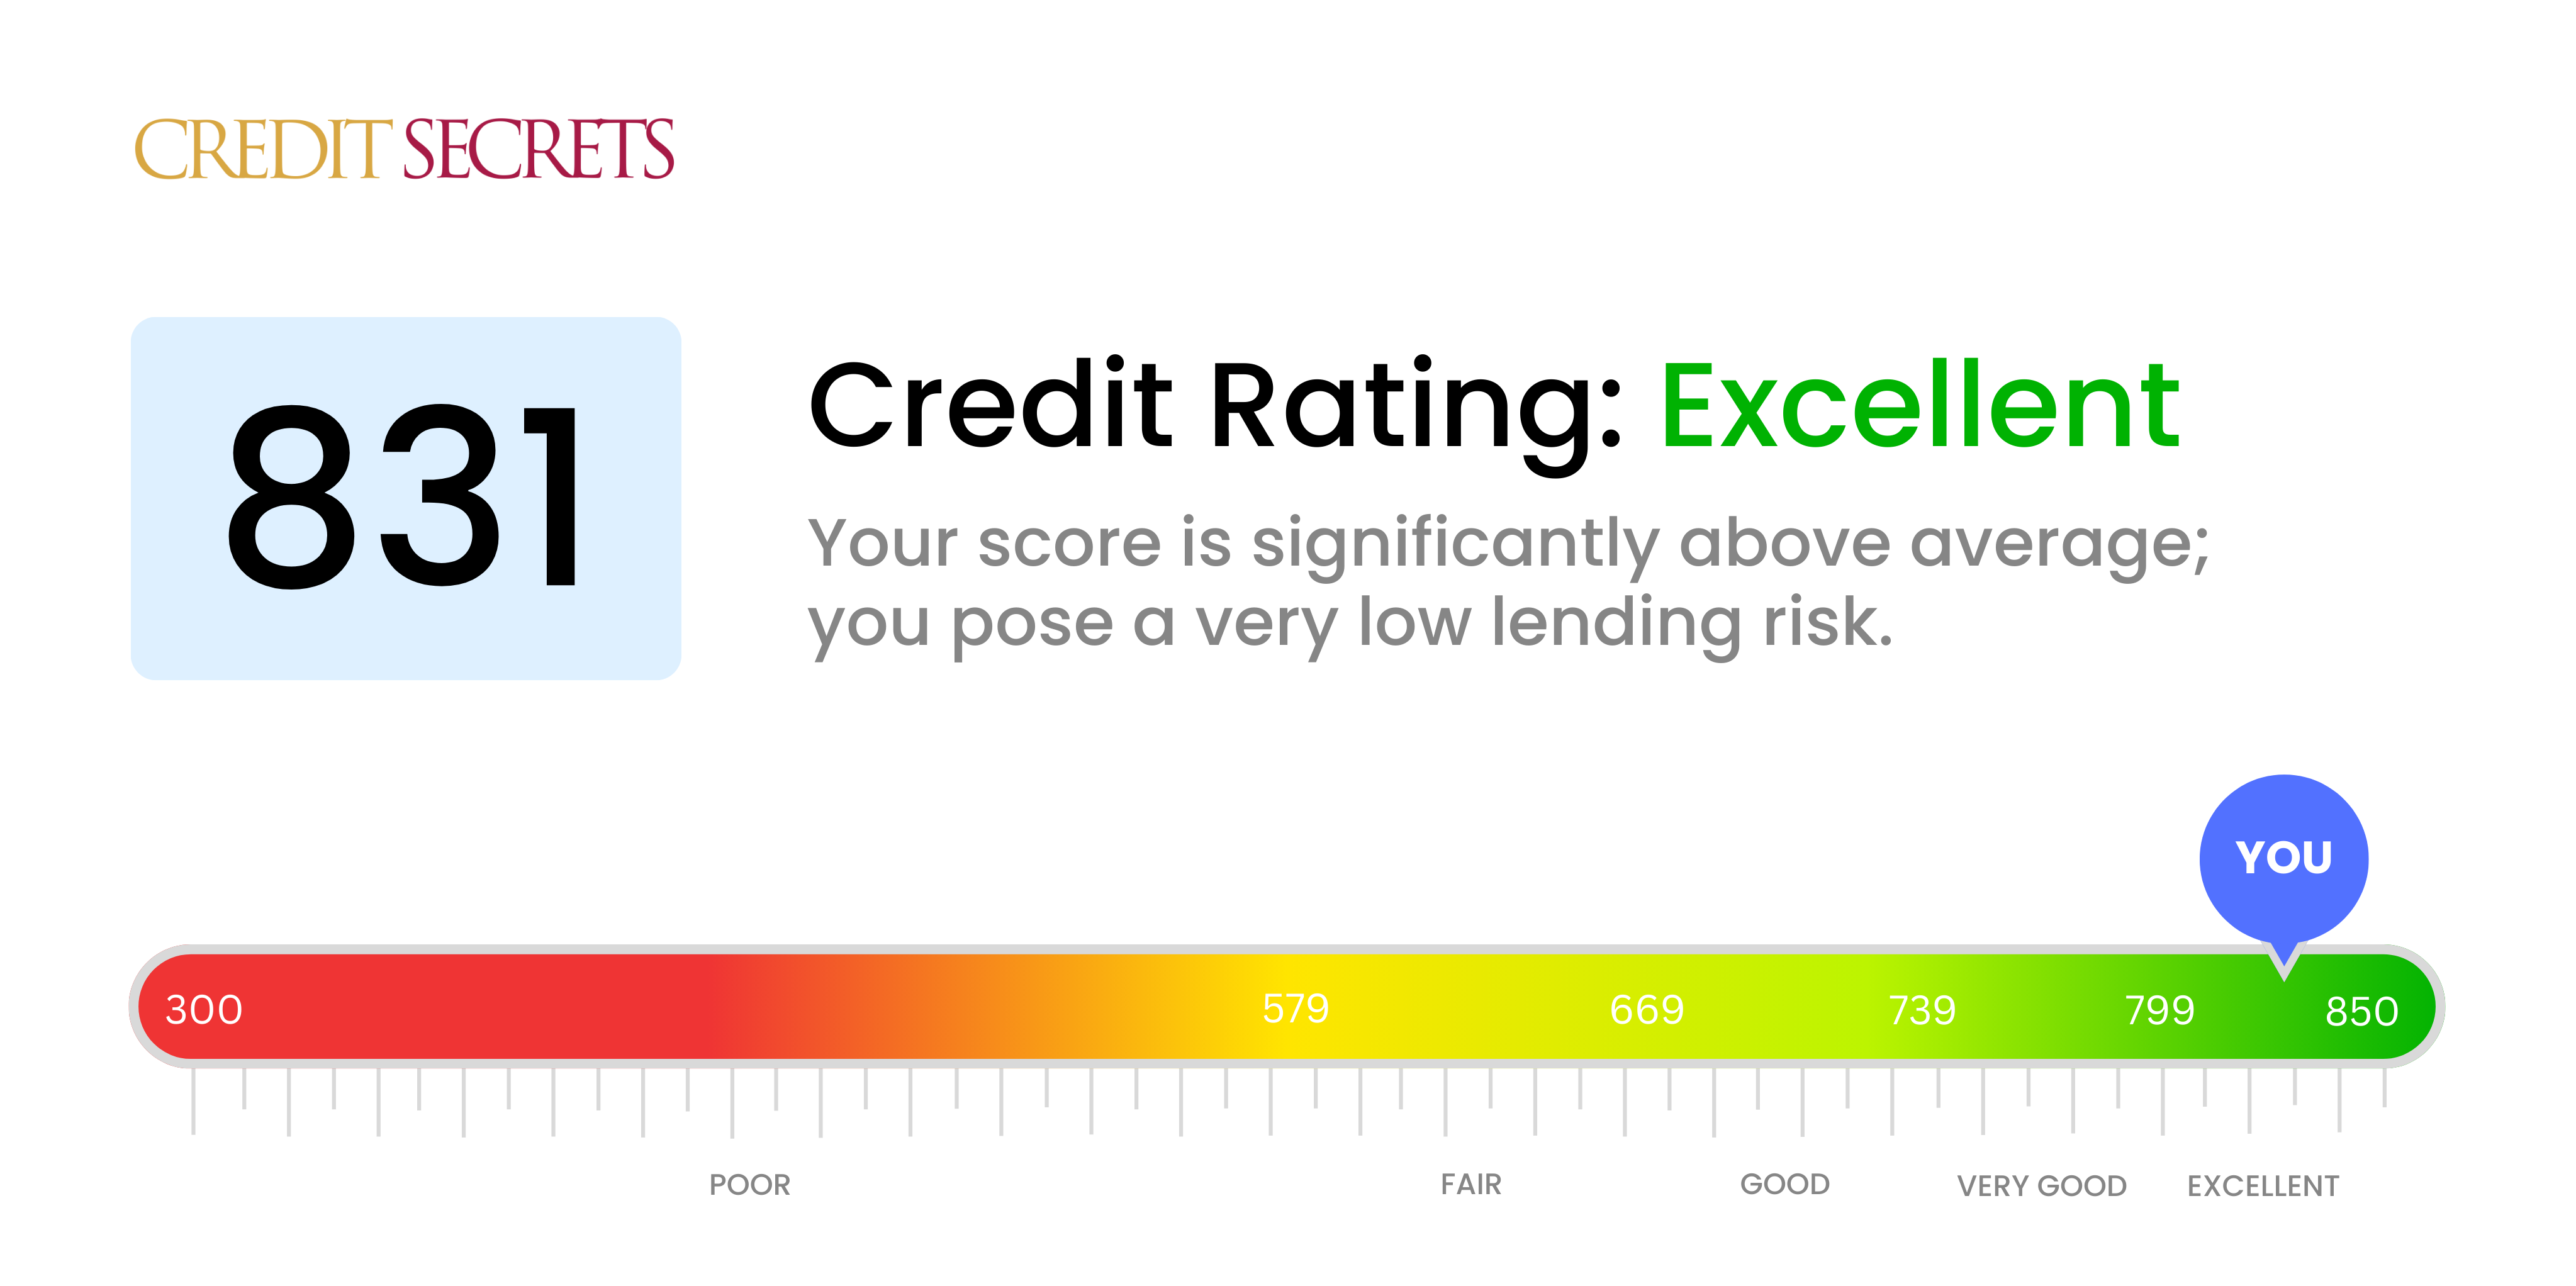 Is 831 a good credit score?